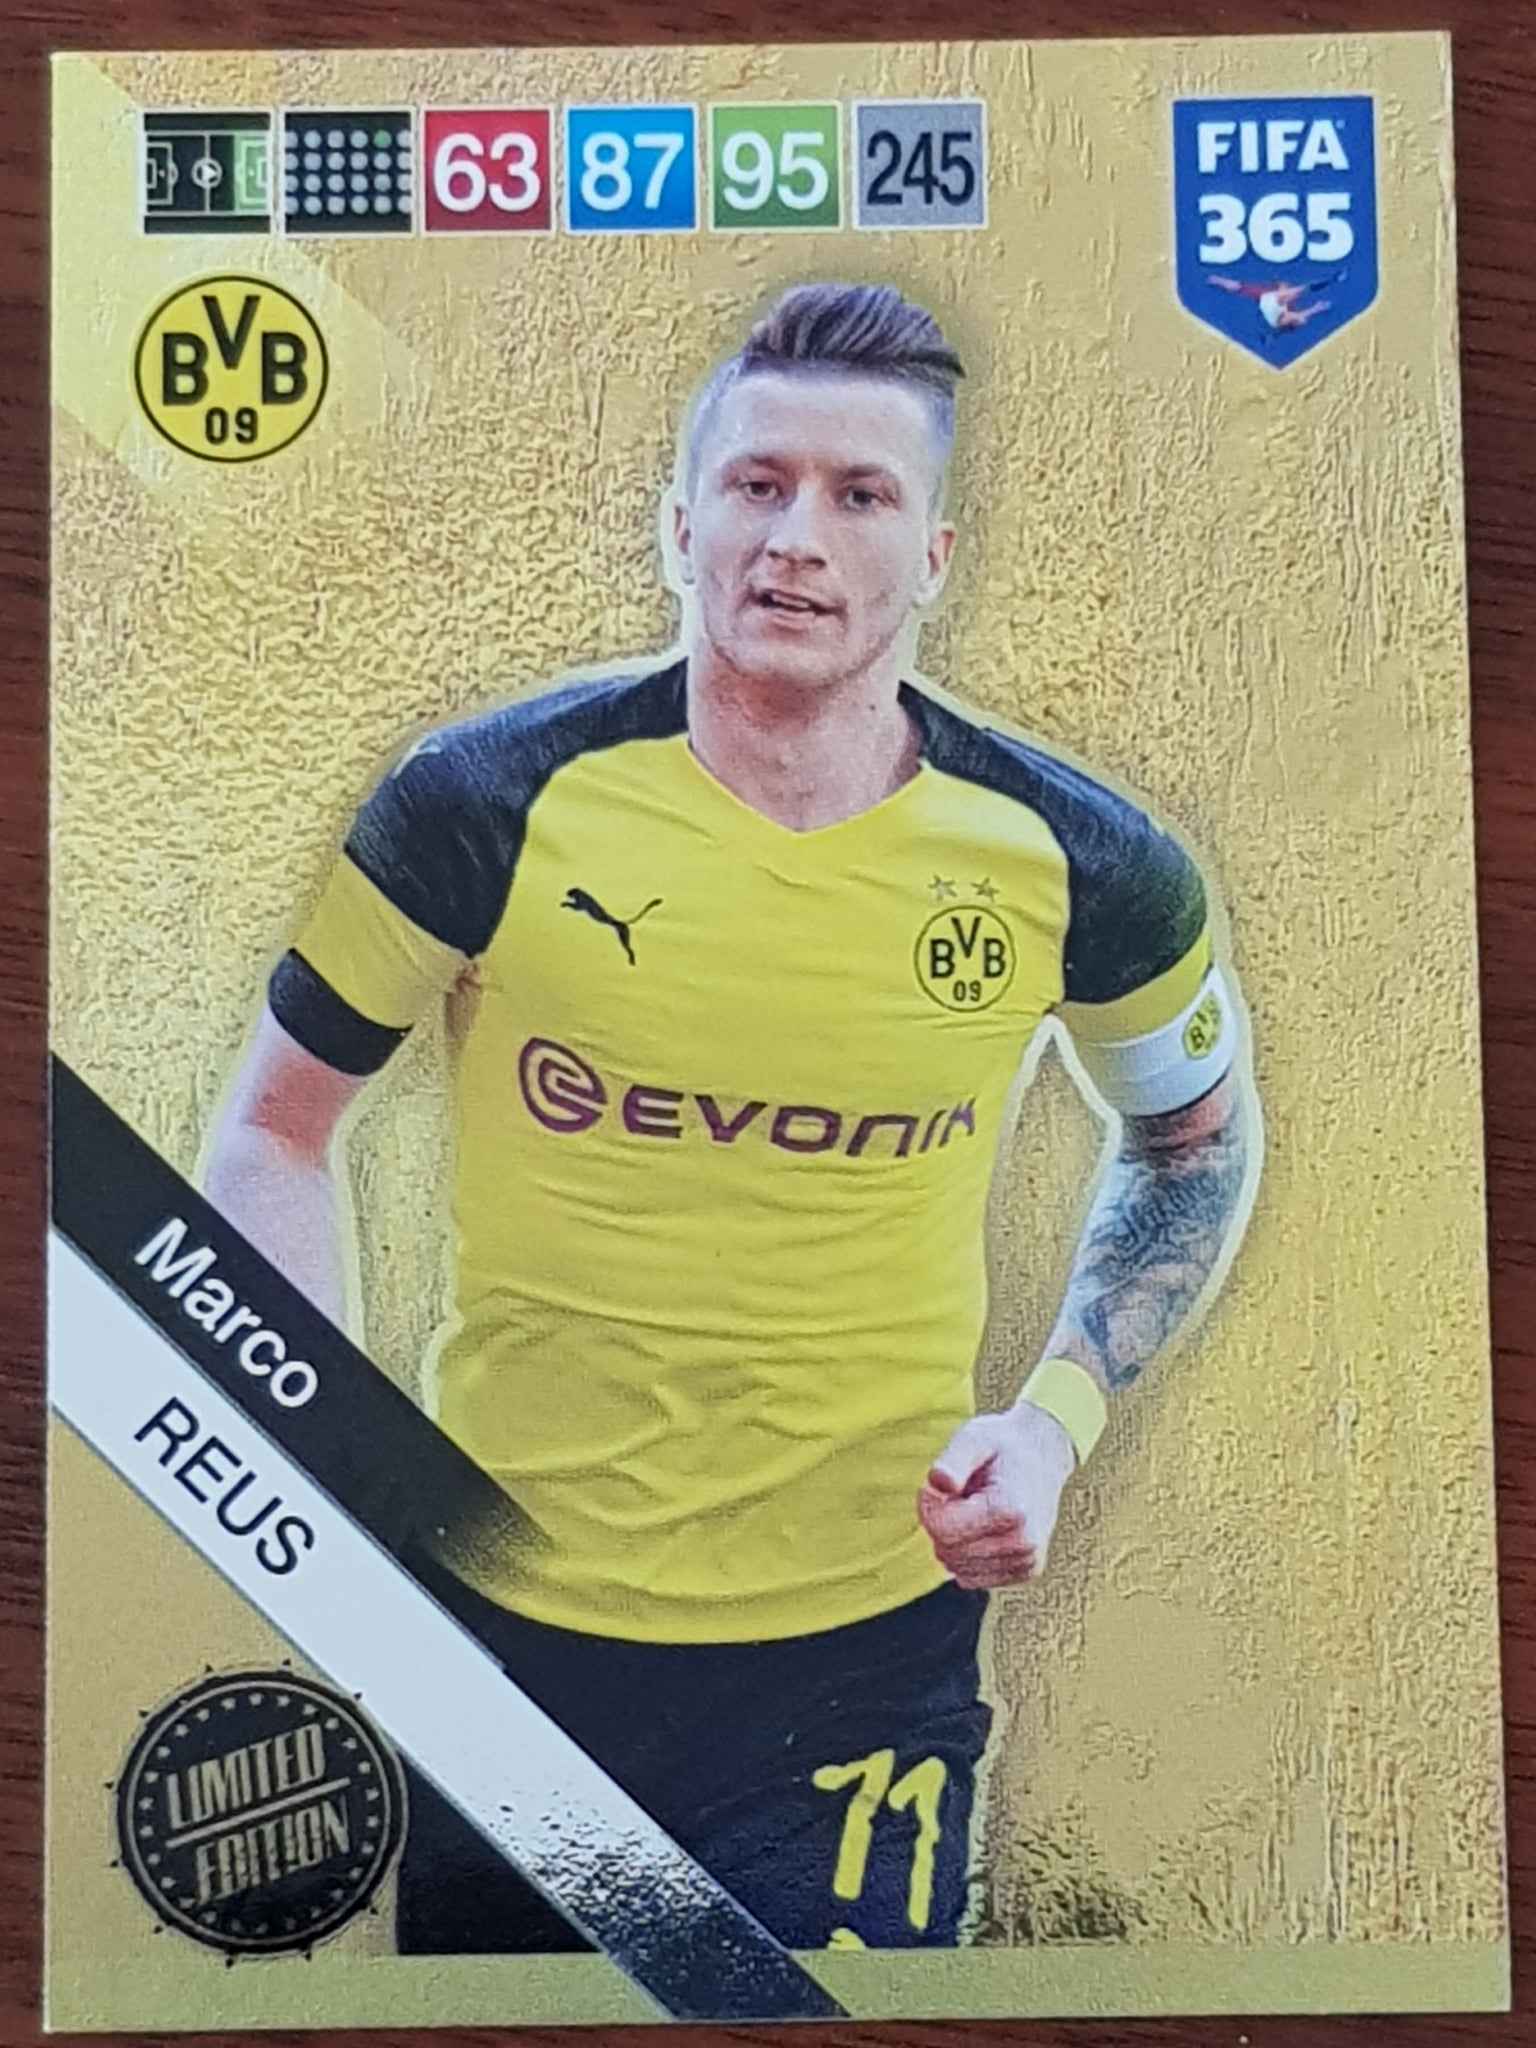 2018 Panini Adrenalyn FIFA 365 Marco Reus Limited Edition Trading Card